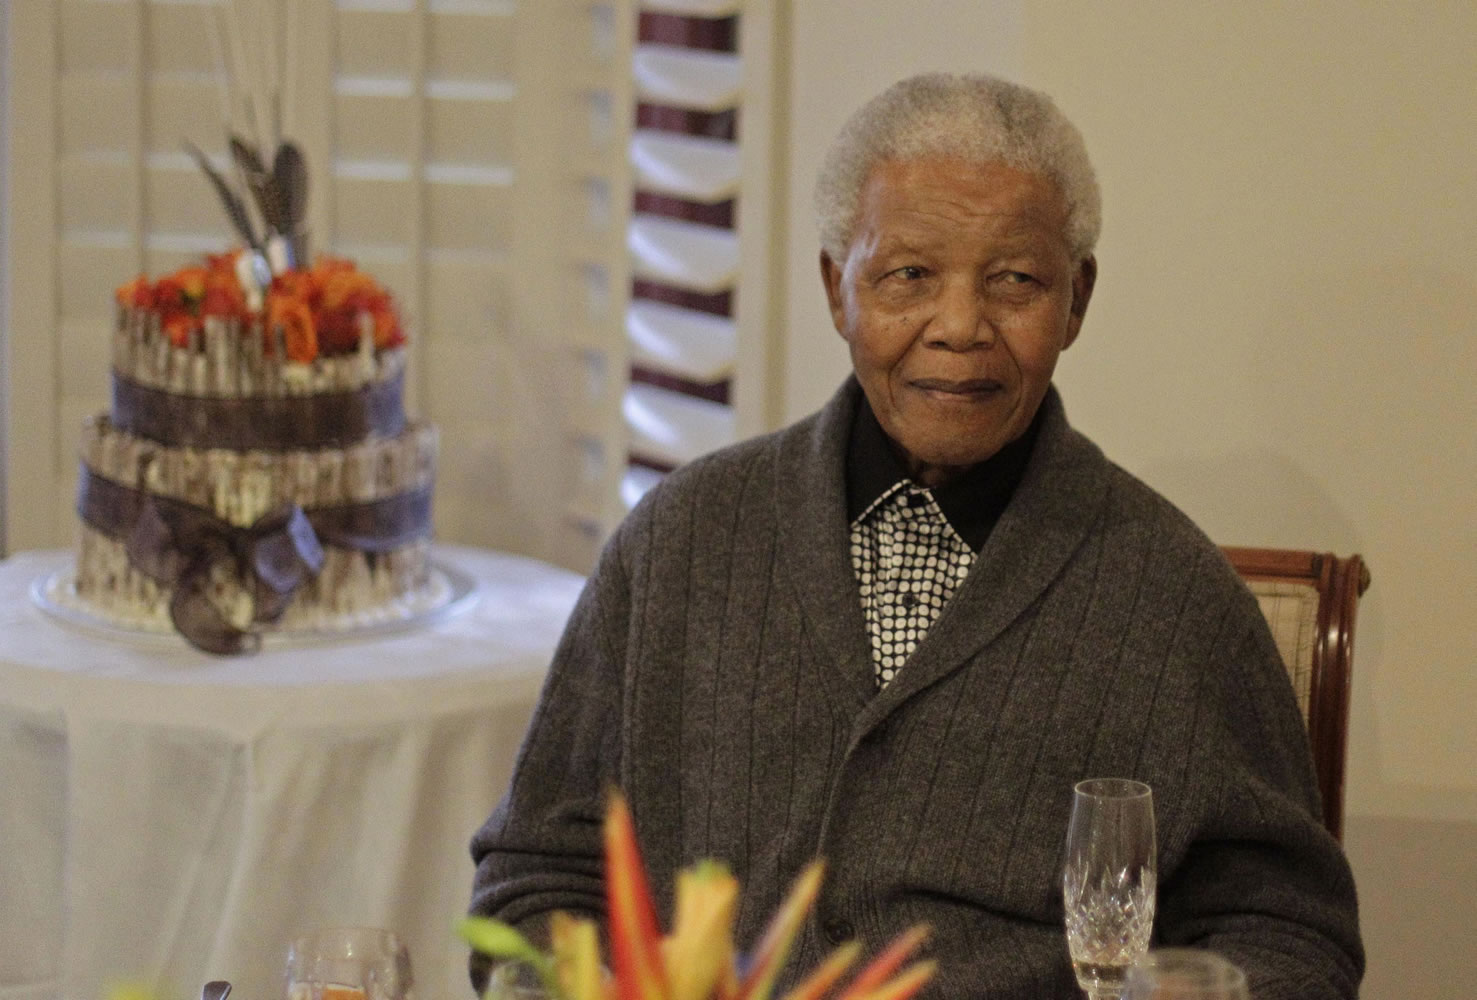 Former South African President Nelson Mandela celebrates his 94th birthday with family in Qunu, South Africa on July 18, 2012.